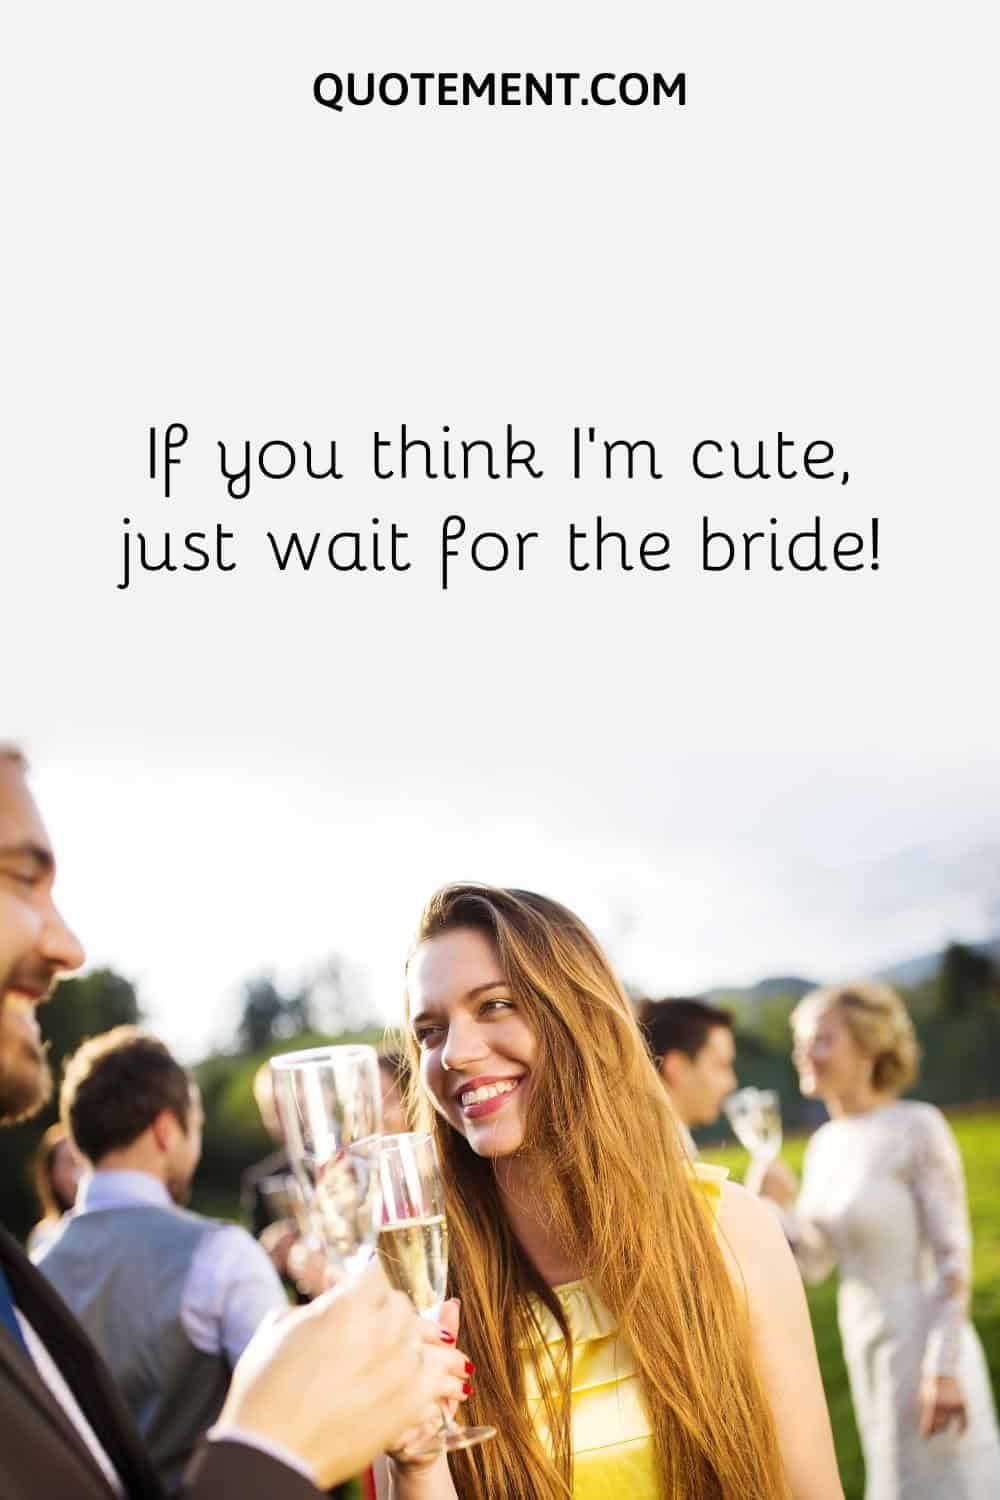 If you think I’m cute, just wait for the bride! 